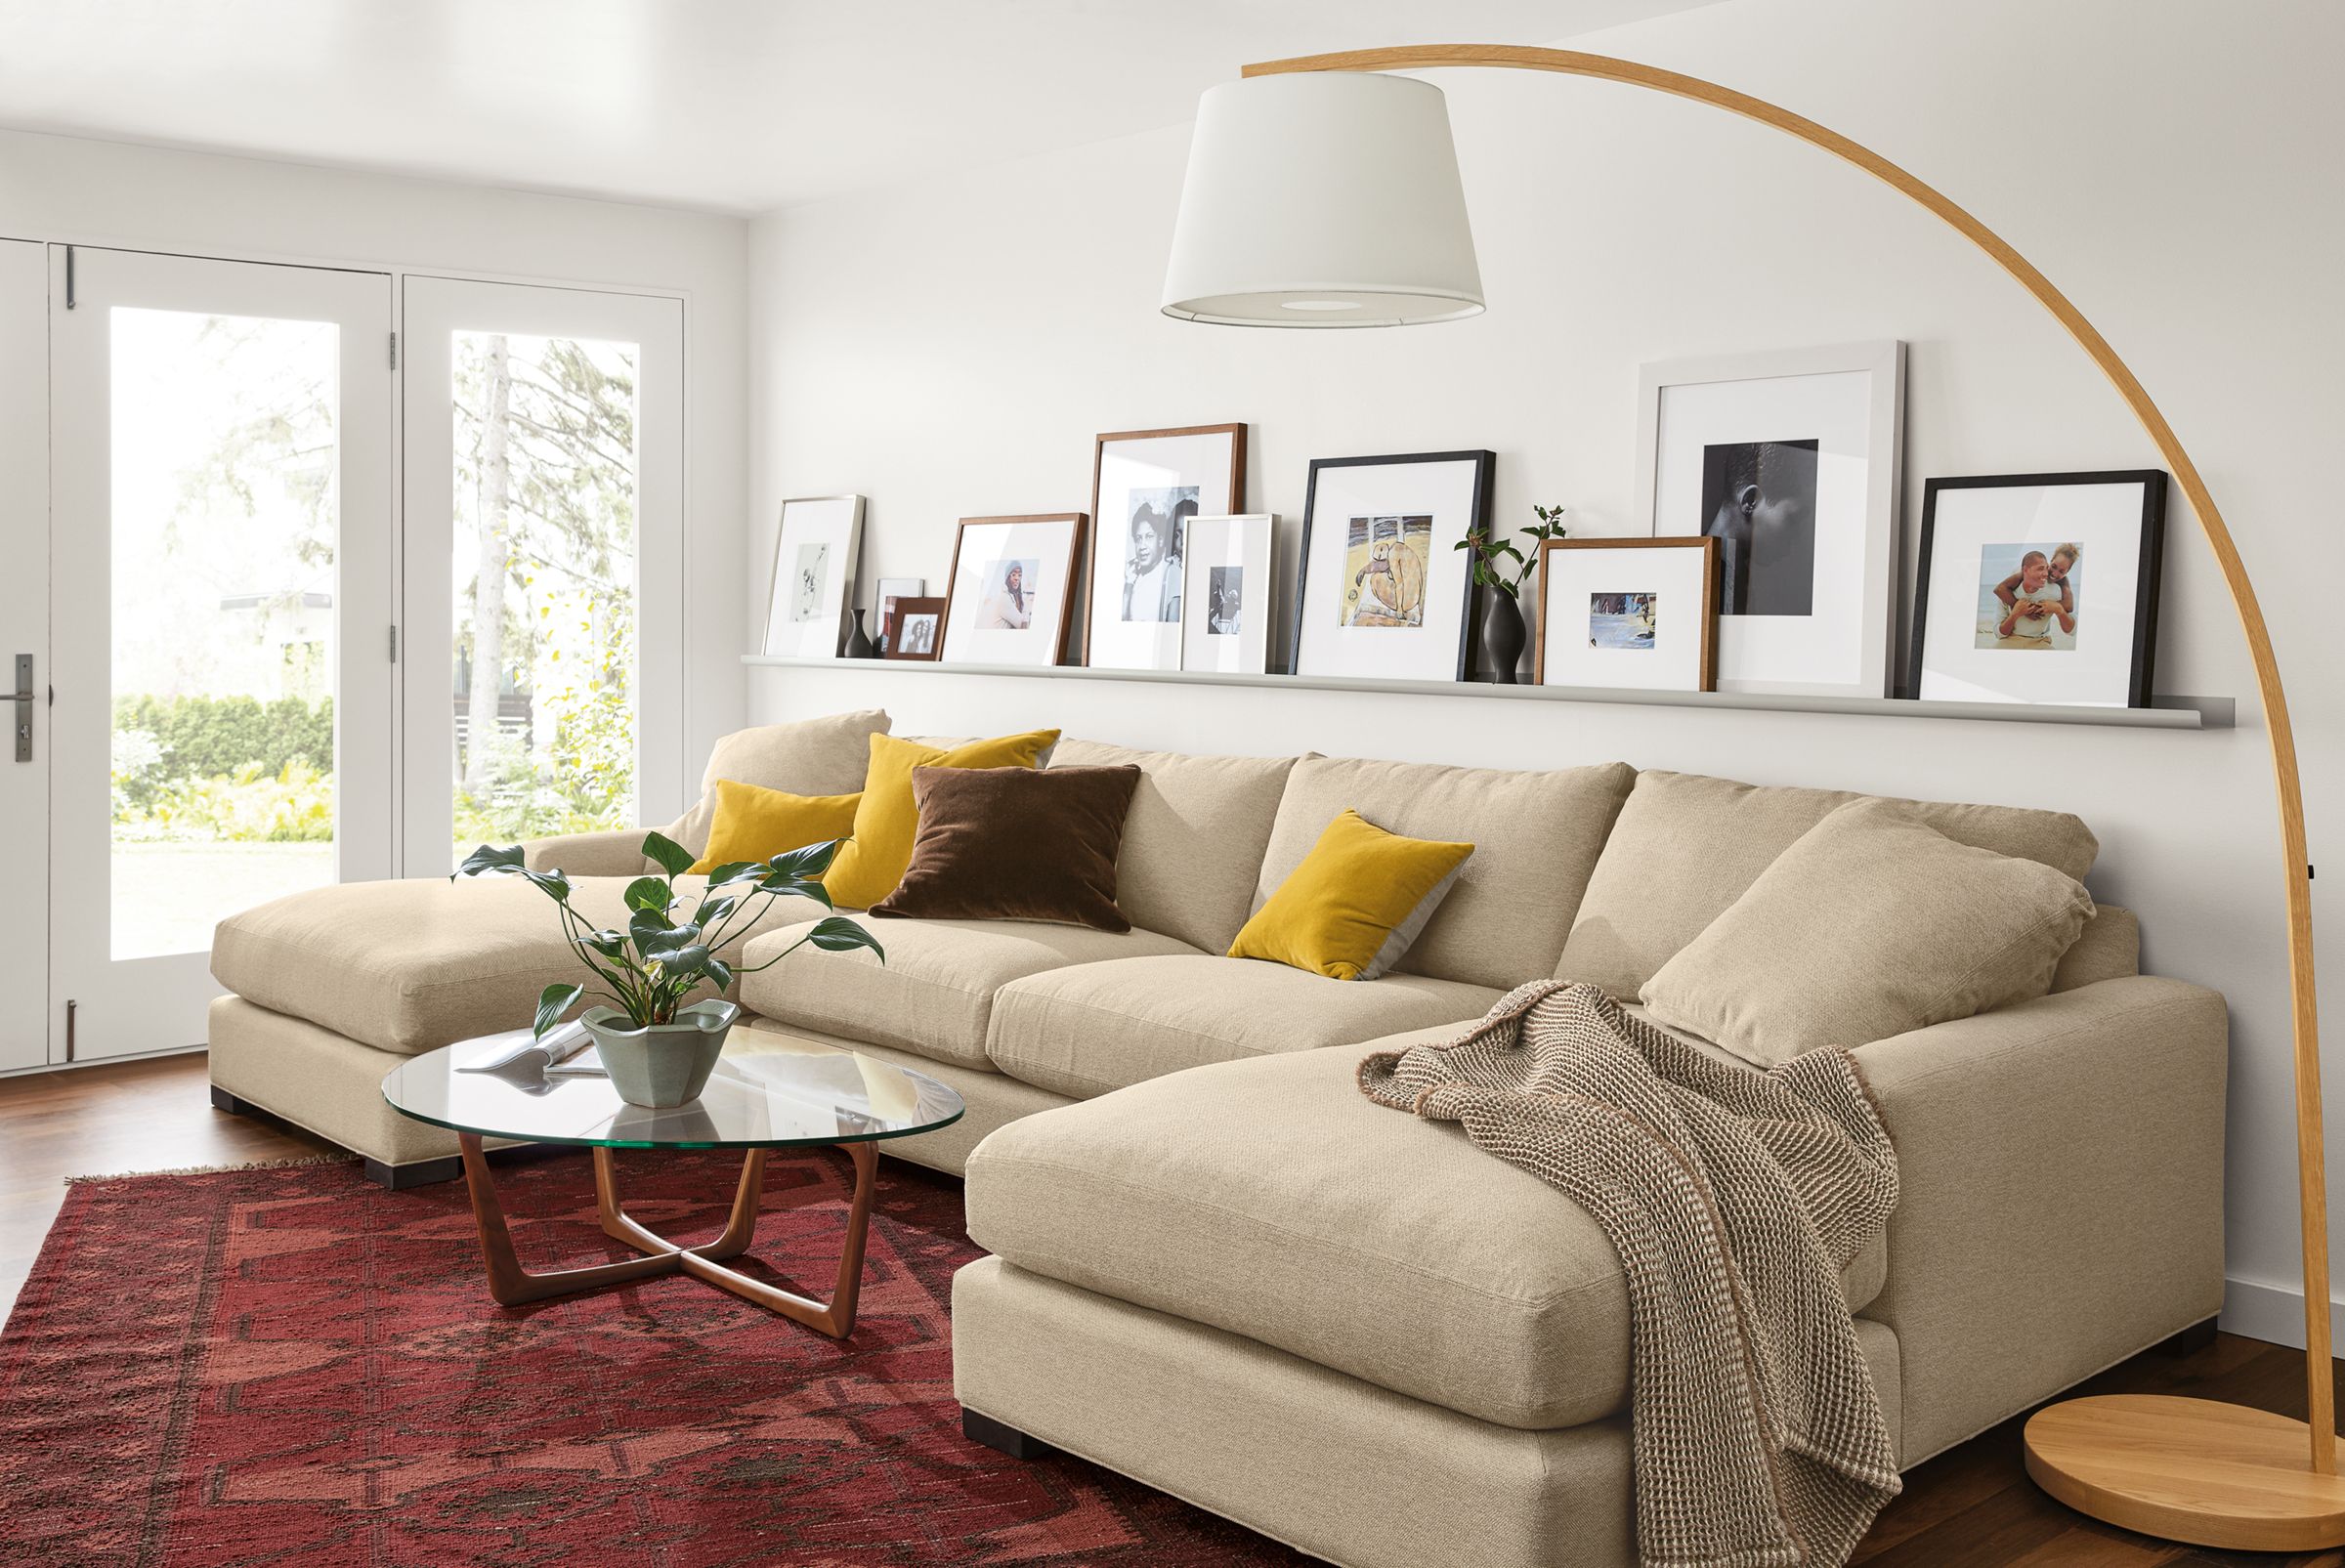 Detail of Mayer U-shaped sectional in Tatum Oatmeal fabric in living room.